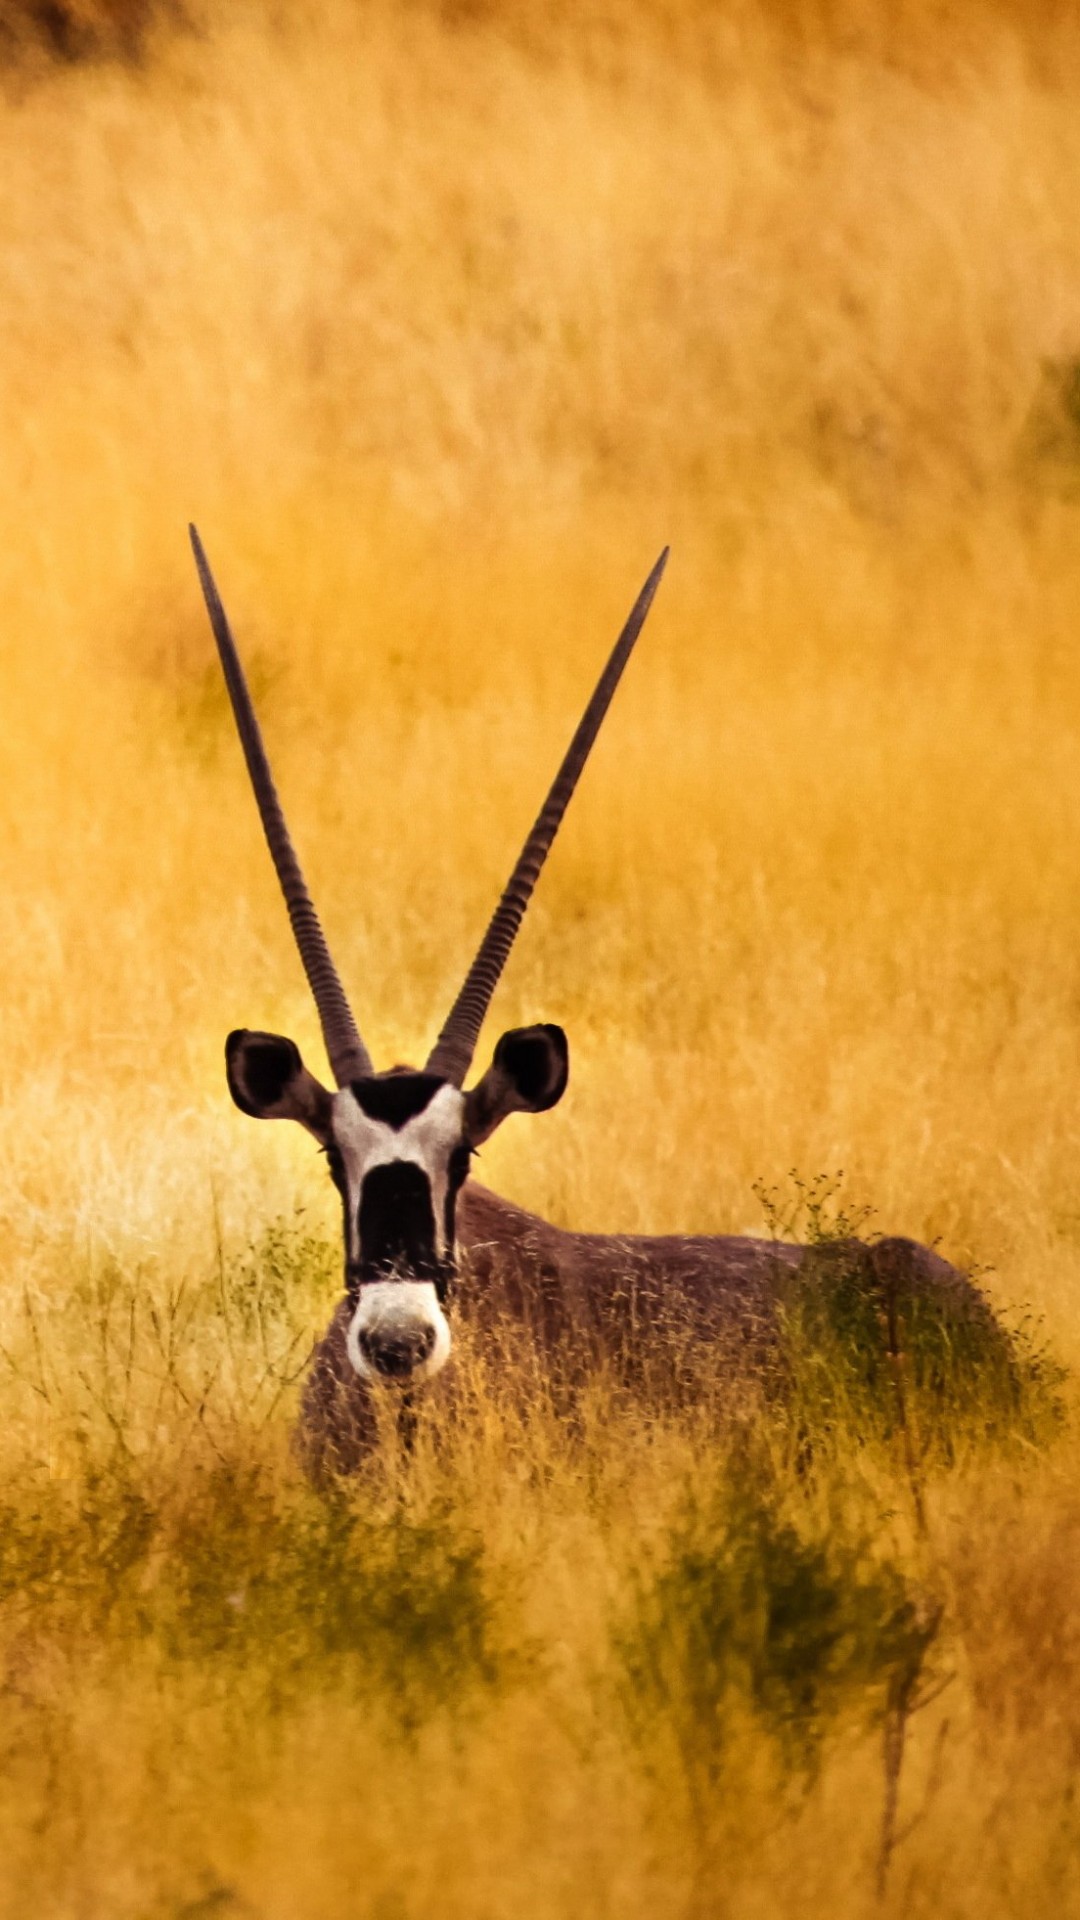 Antelope In The Savanna Wallpaper for SAMSUNG Galaxy Note 3